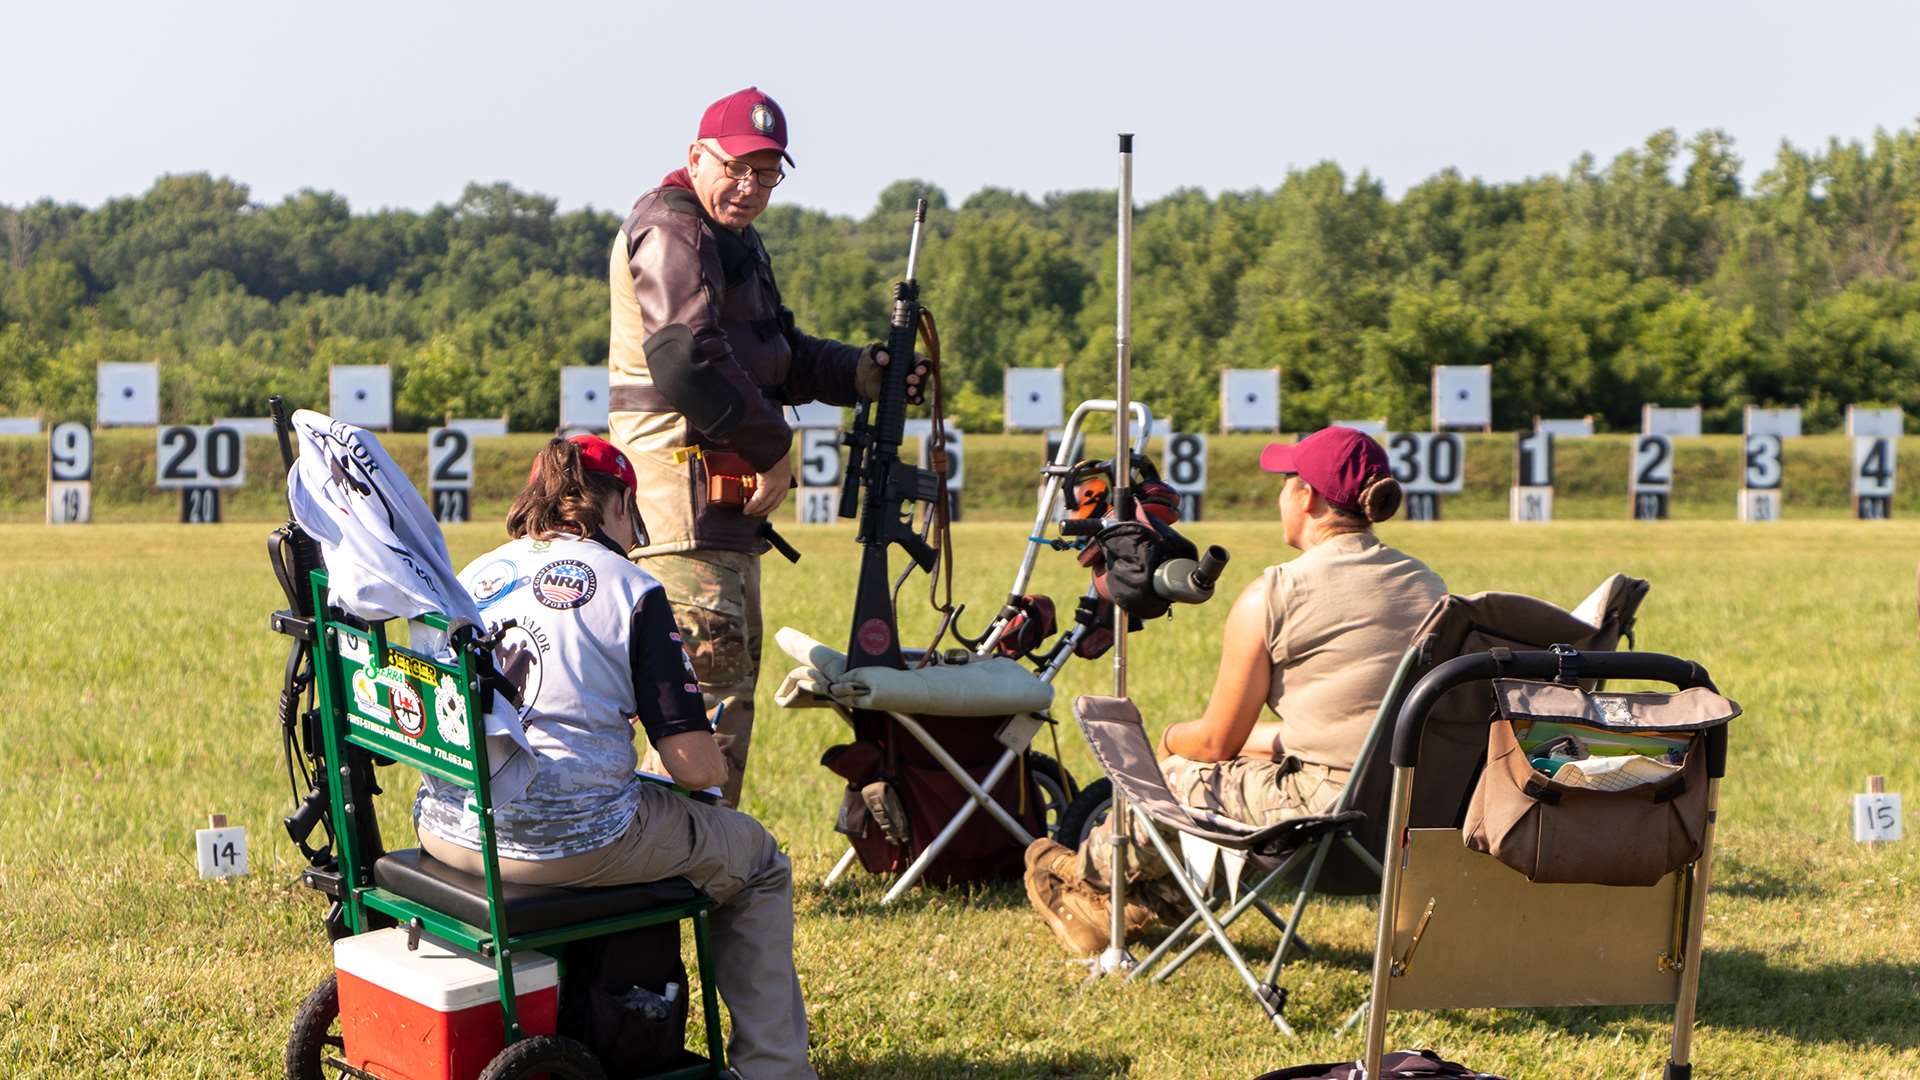 NRA High Power Rifle competitors